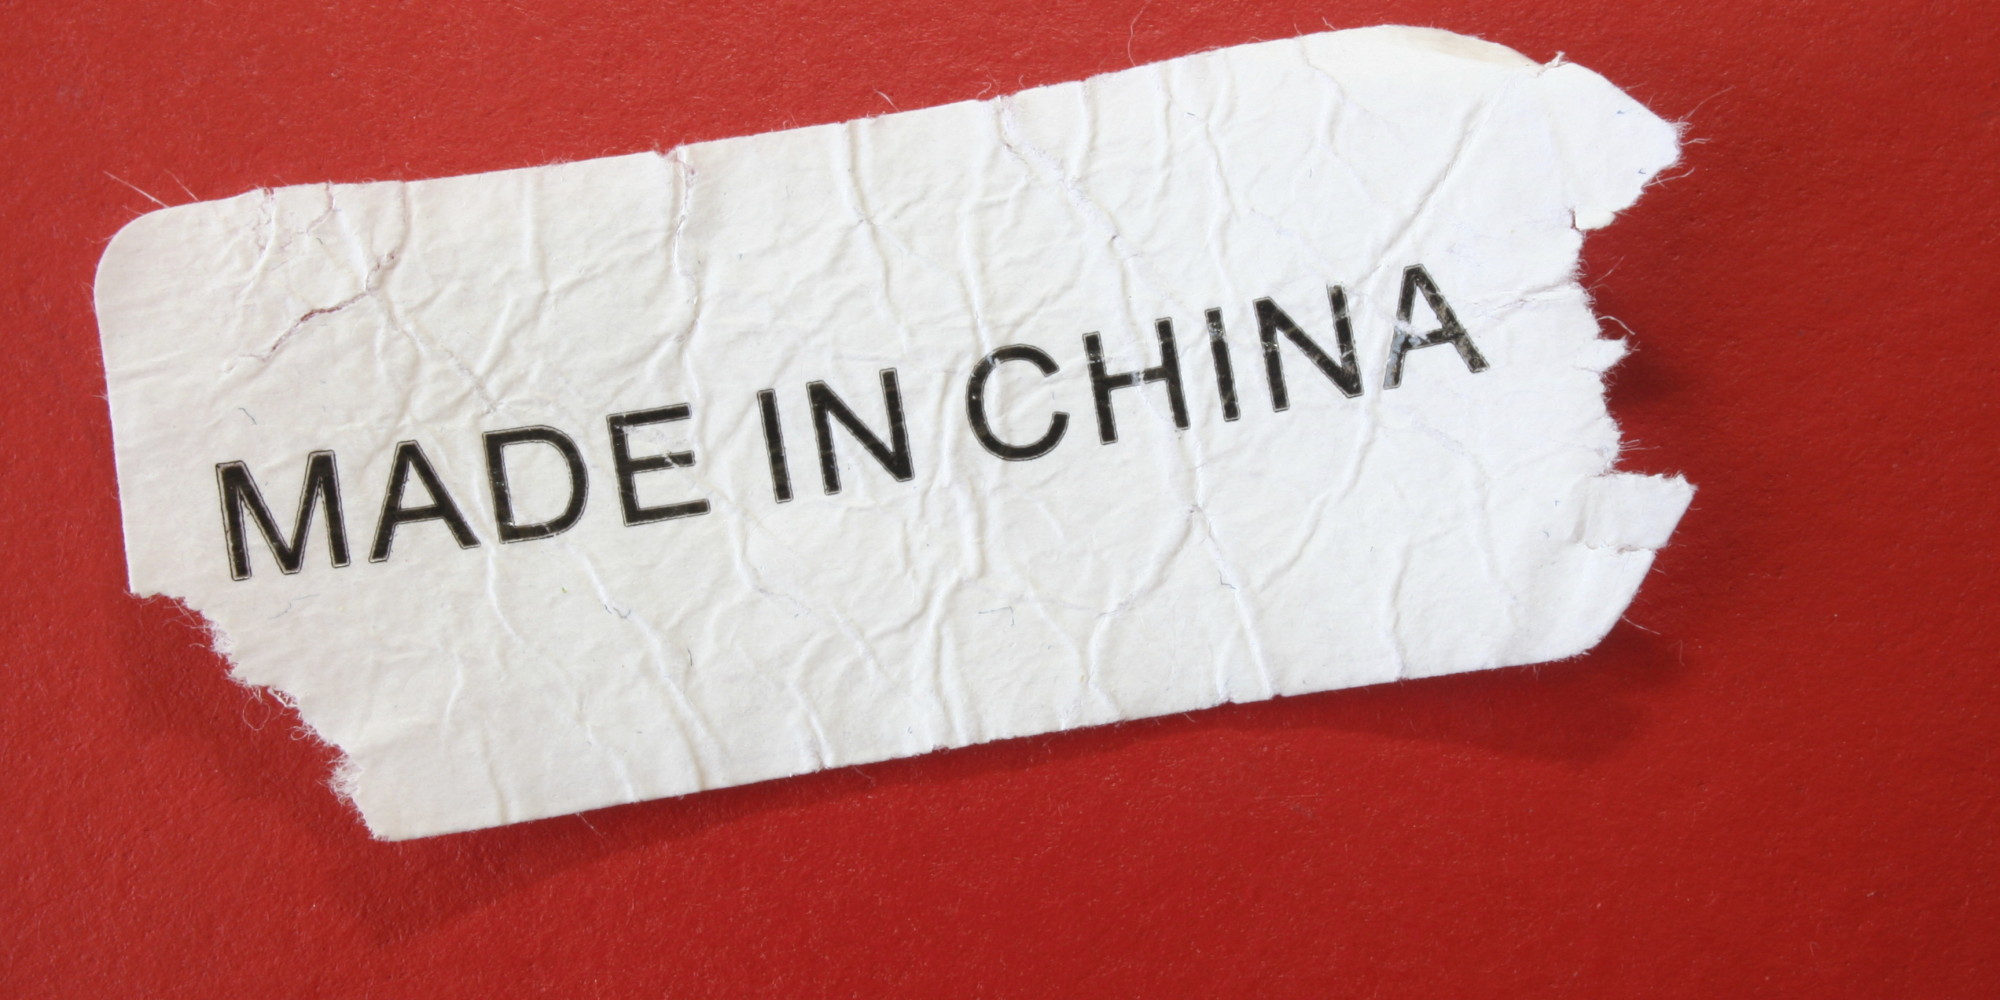 Why Choose Not Made In China Products